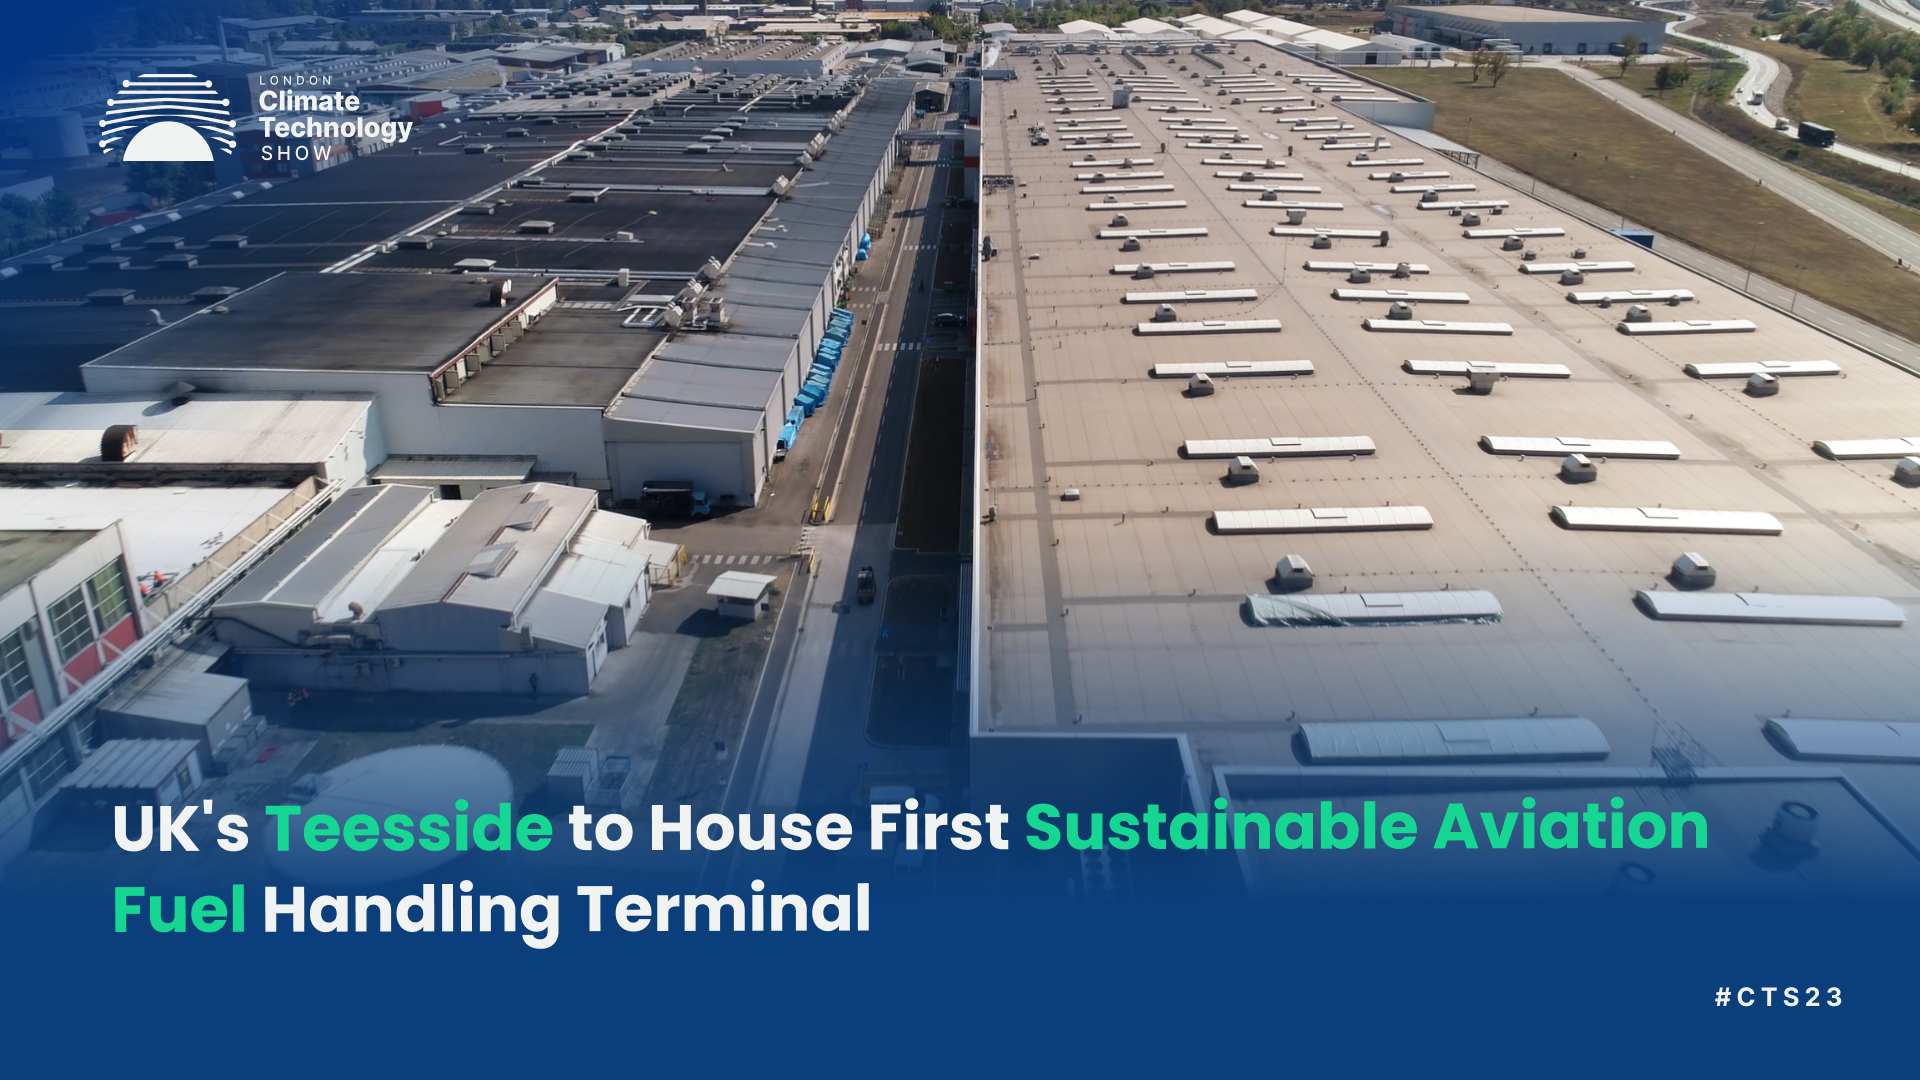 UK's Teesside to House First Sustainable Aviation Fuel Handling Terminal